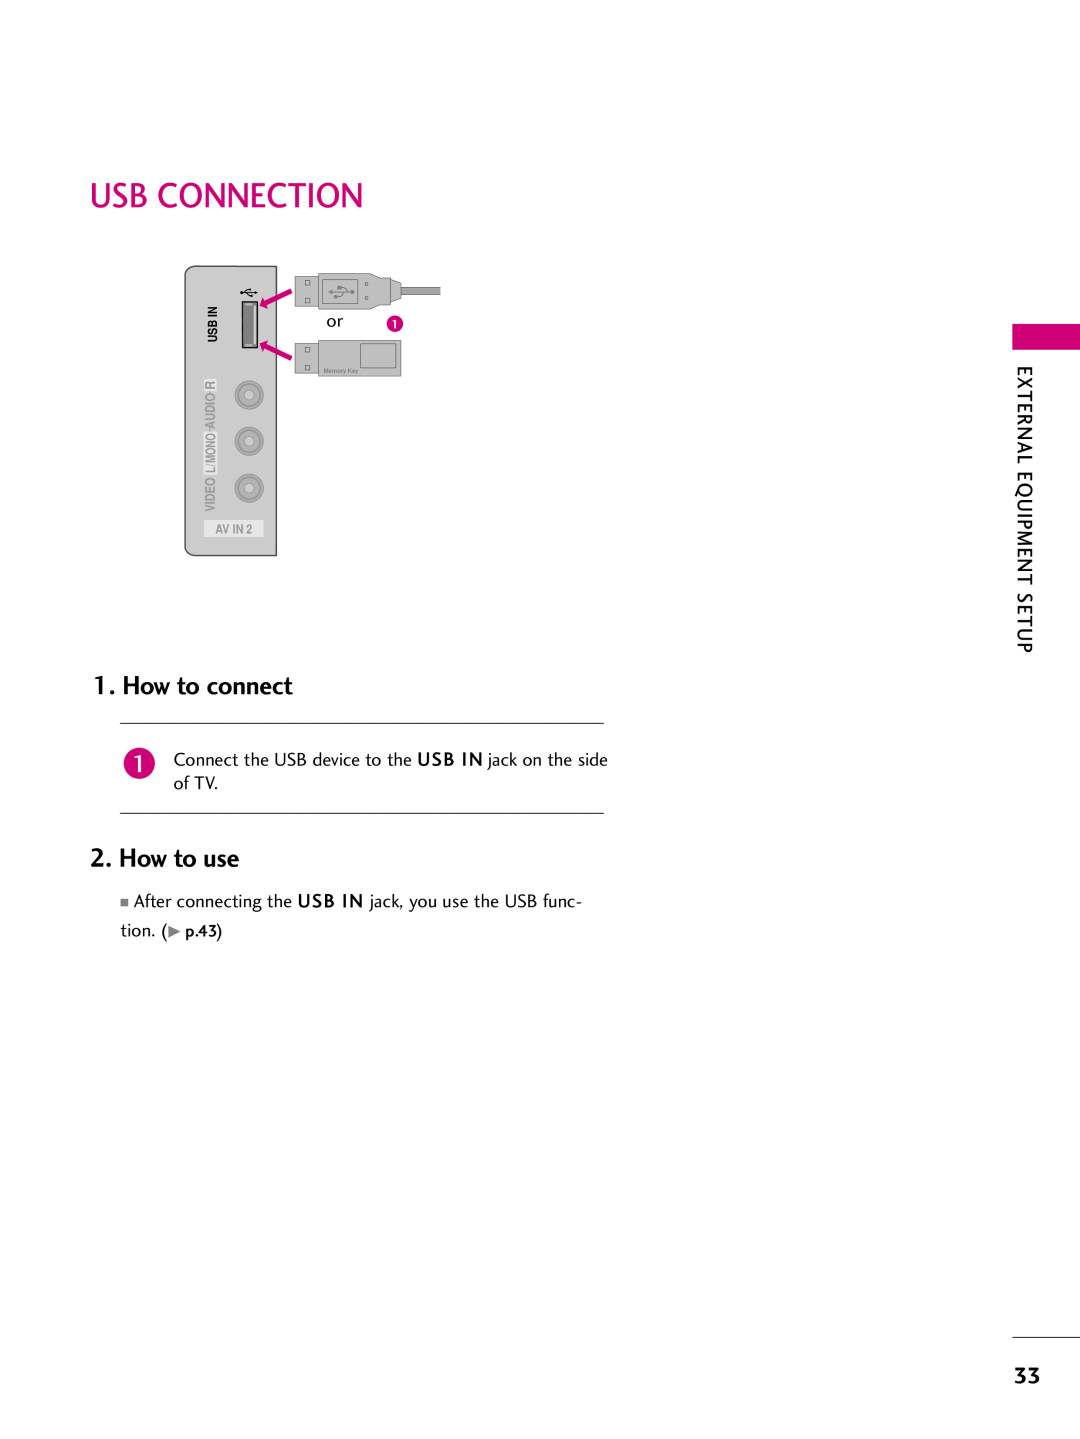 LG Electronics 37LH255H, SAC34026004 Usb Connection, How to connect, How to use, Av In, Video L/Mono Audio R, Memory Key 